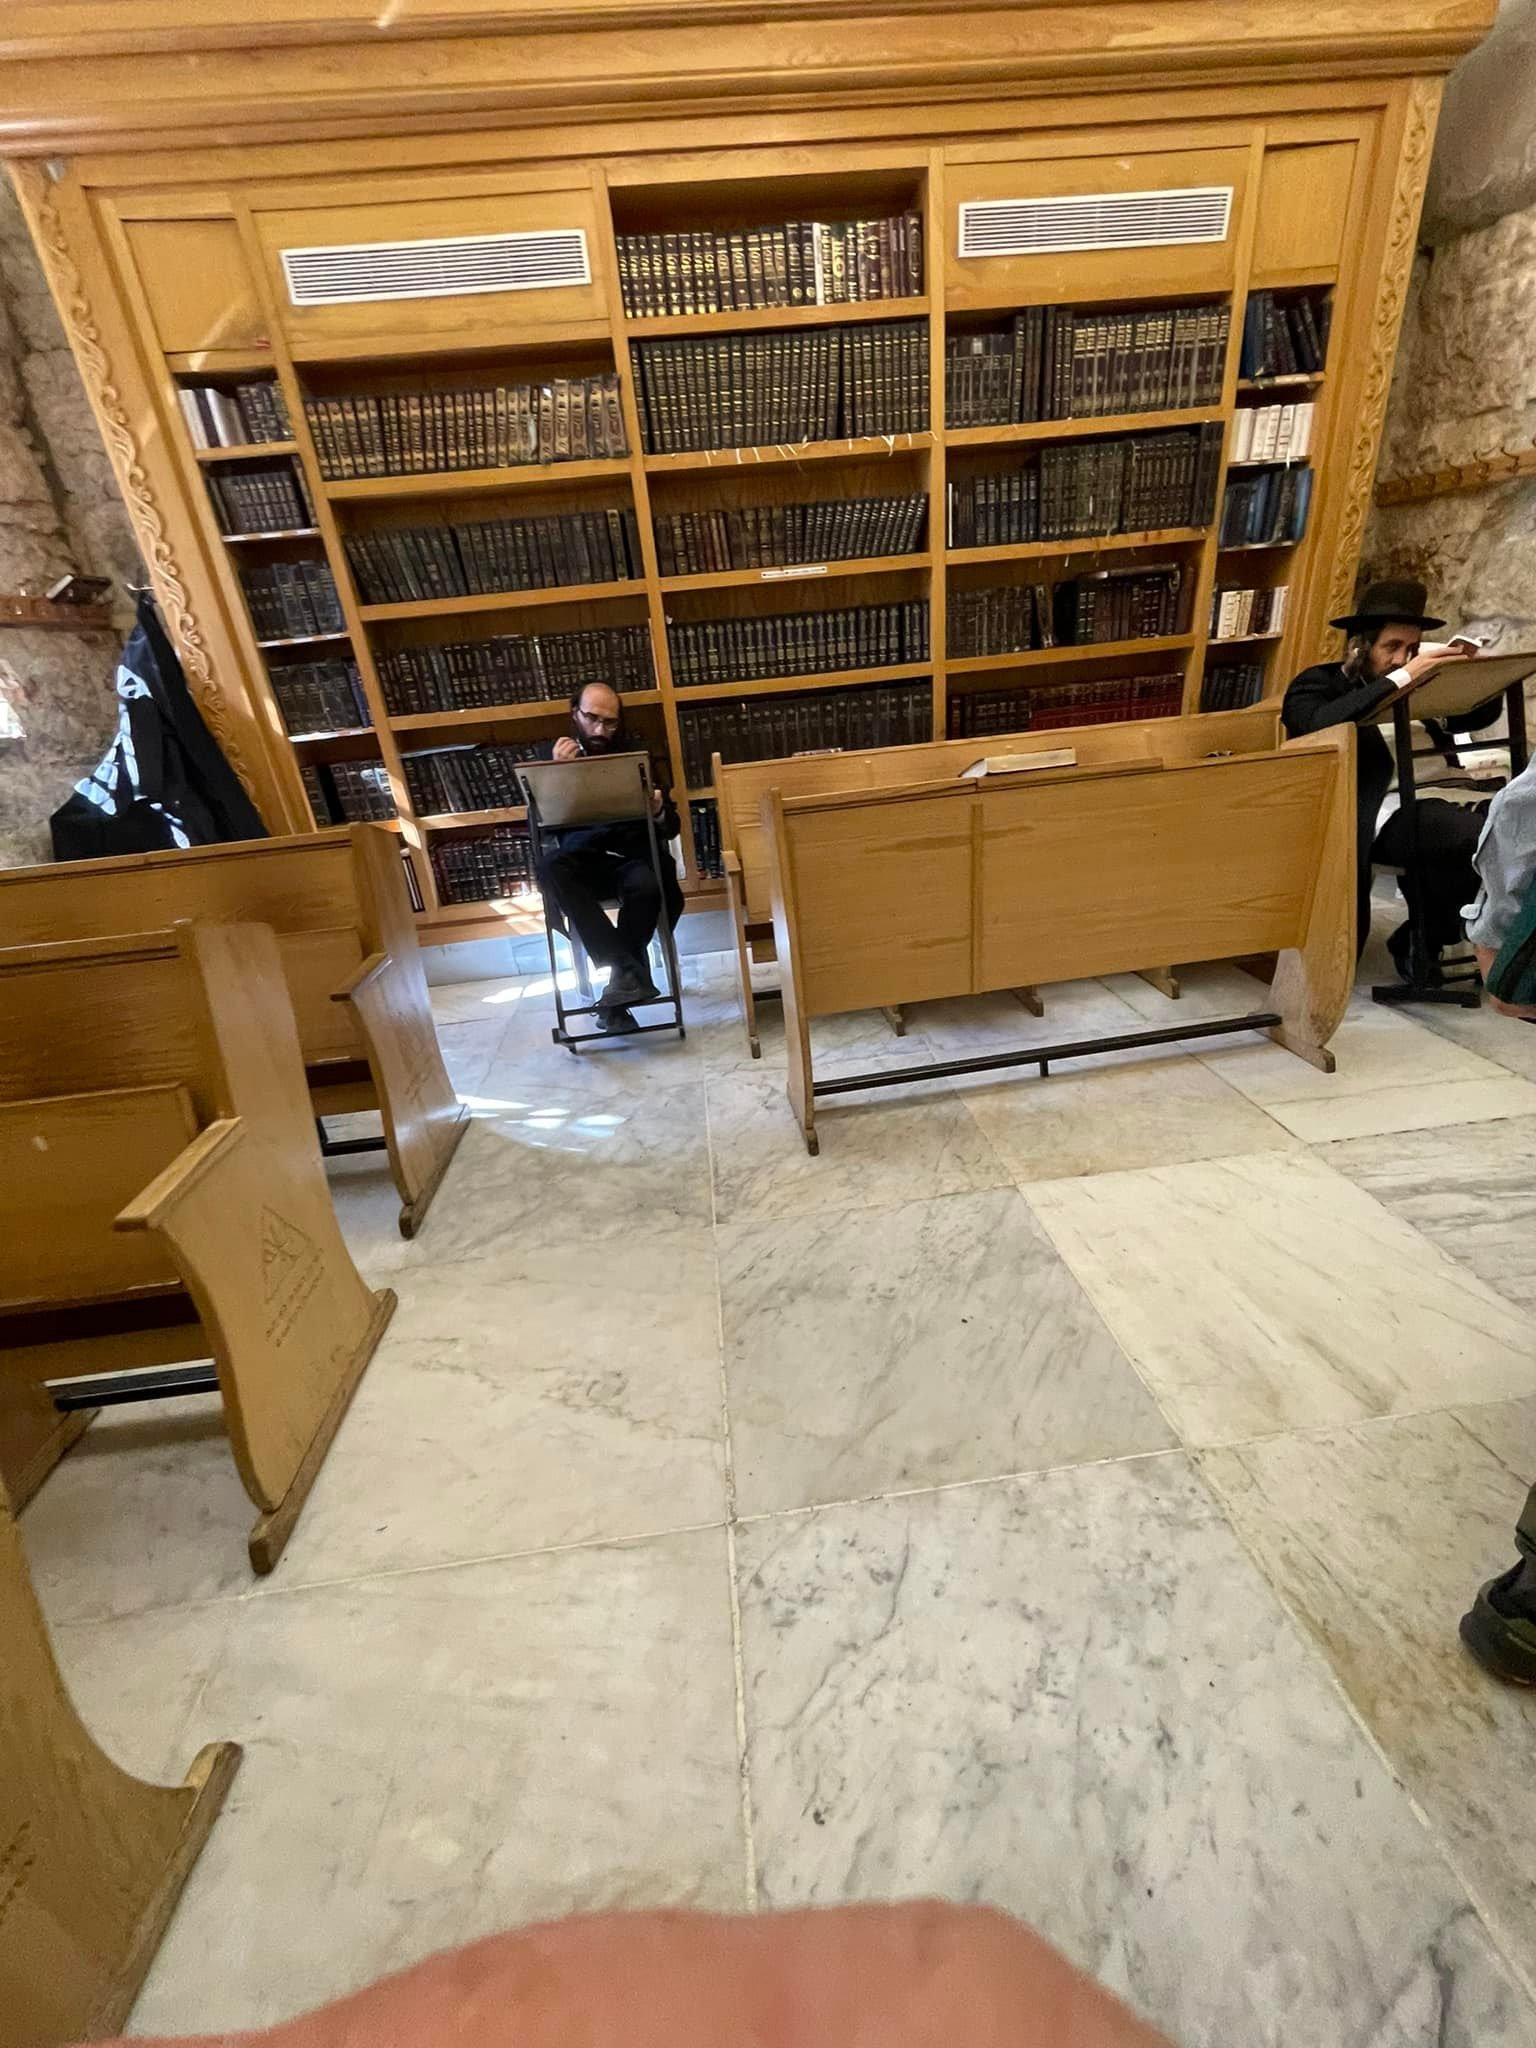  Even so, rabbis and other scholars come and study in this holy space. 